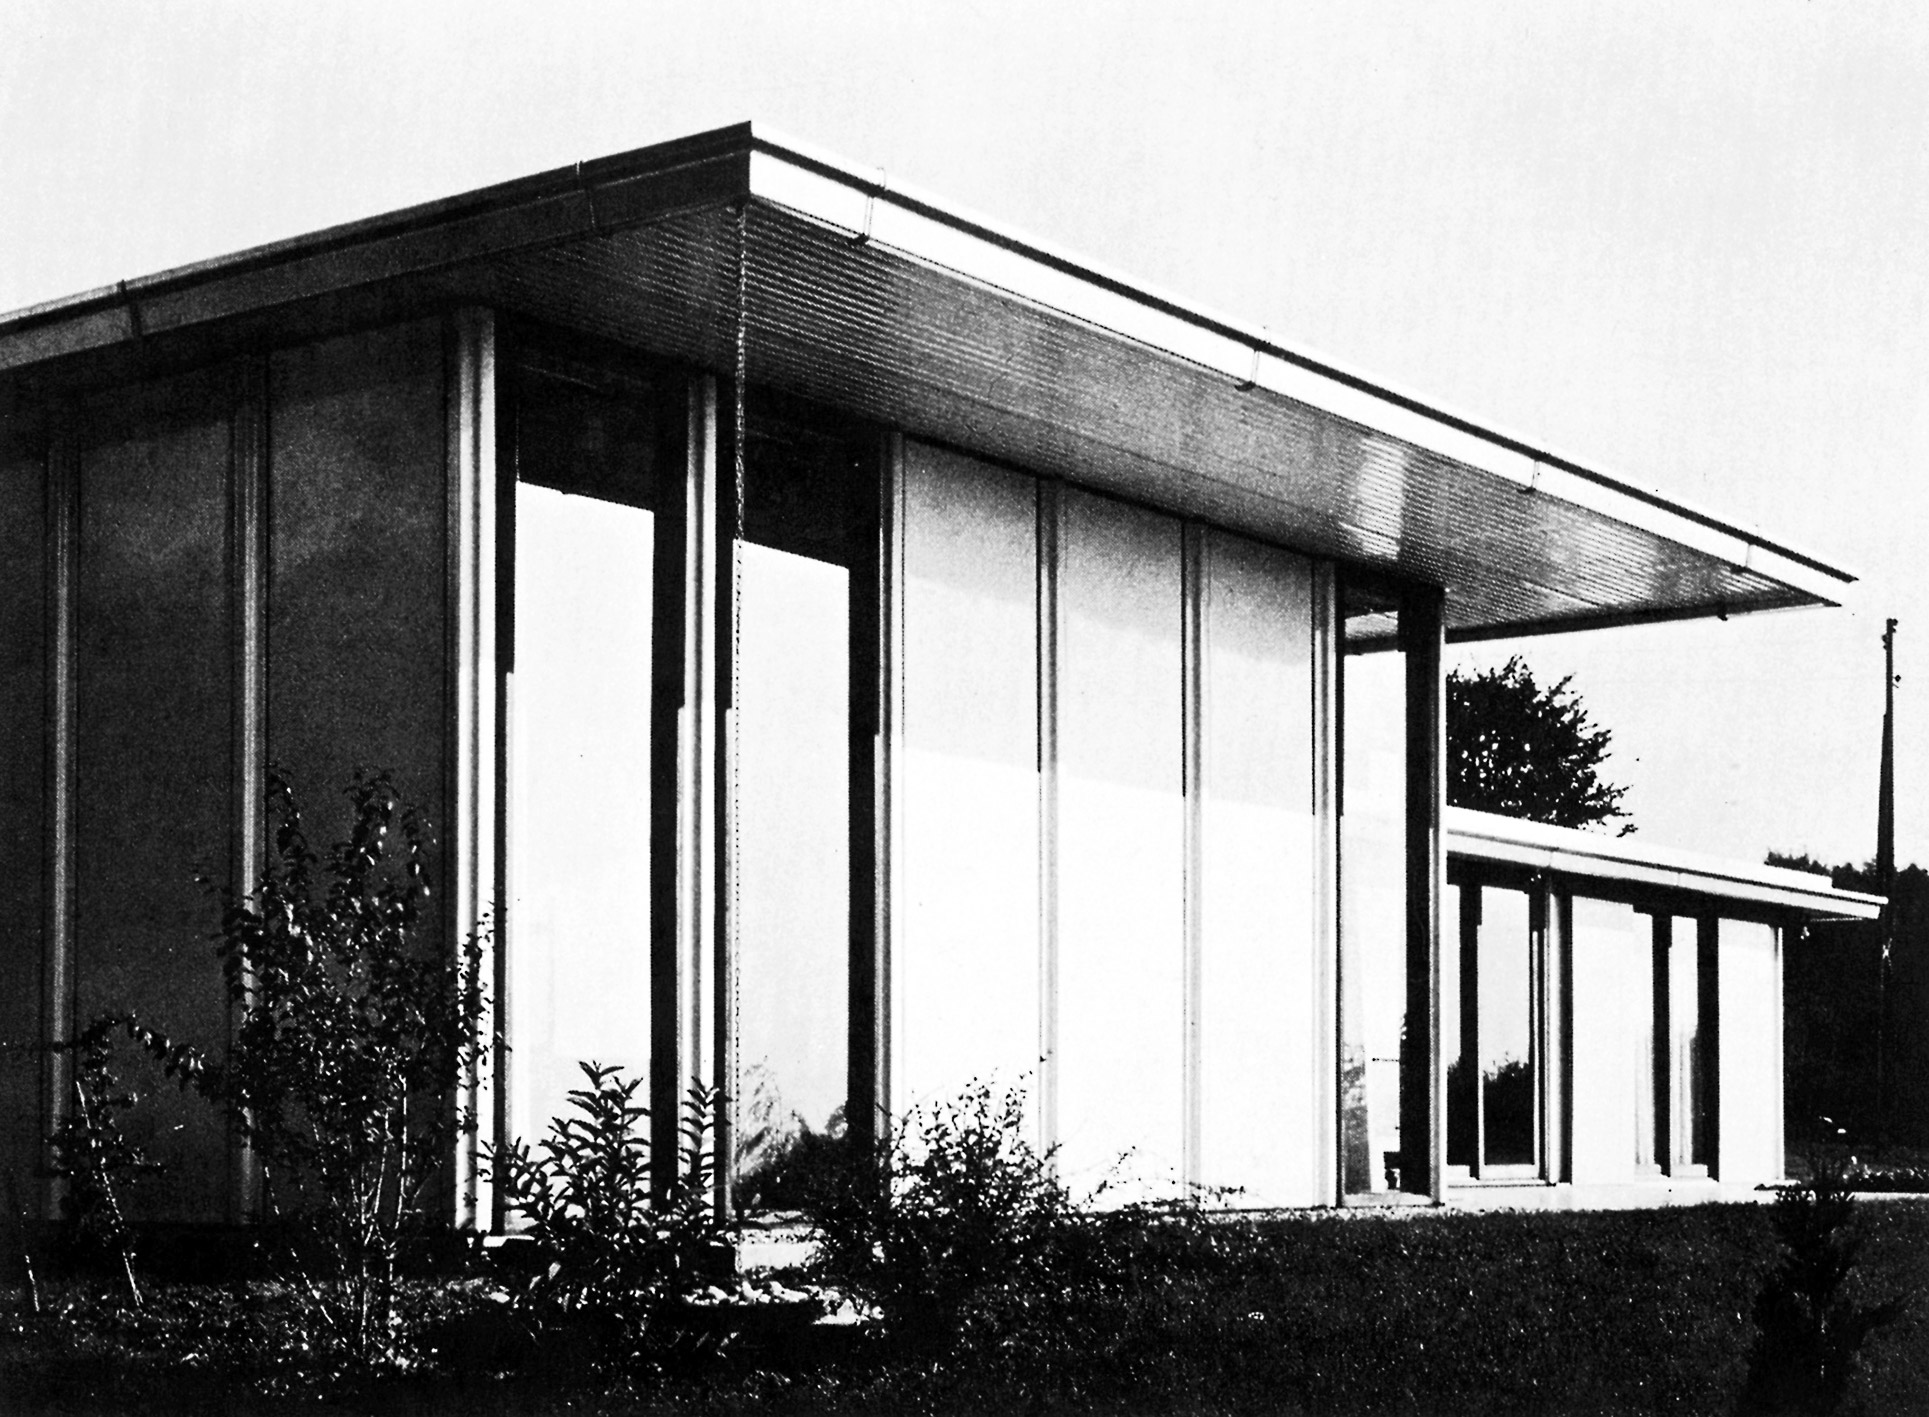 Prototype of an industrialized house for Saint-Gobain, Clermont, 1966 (J. Bédier, S. Binotto, R. Hayama, collaborators).